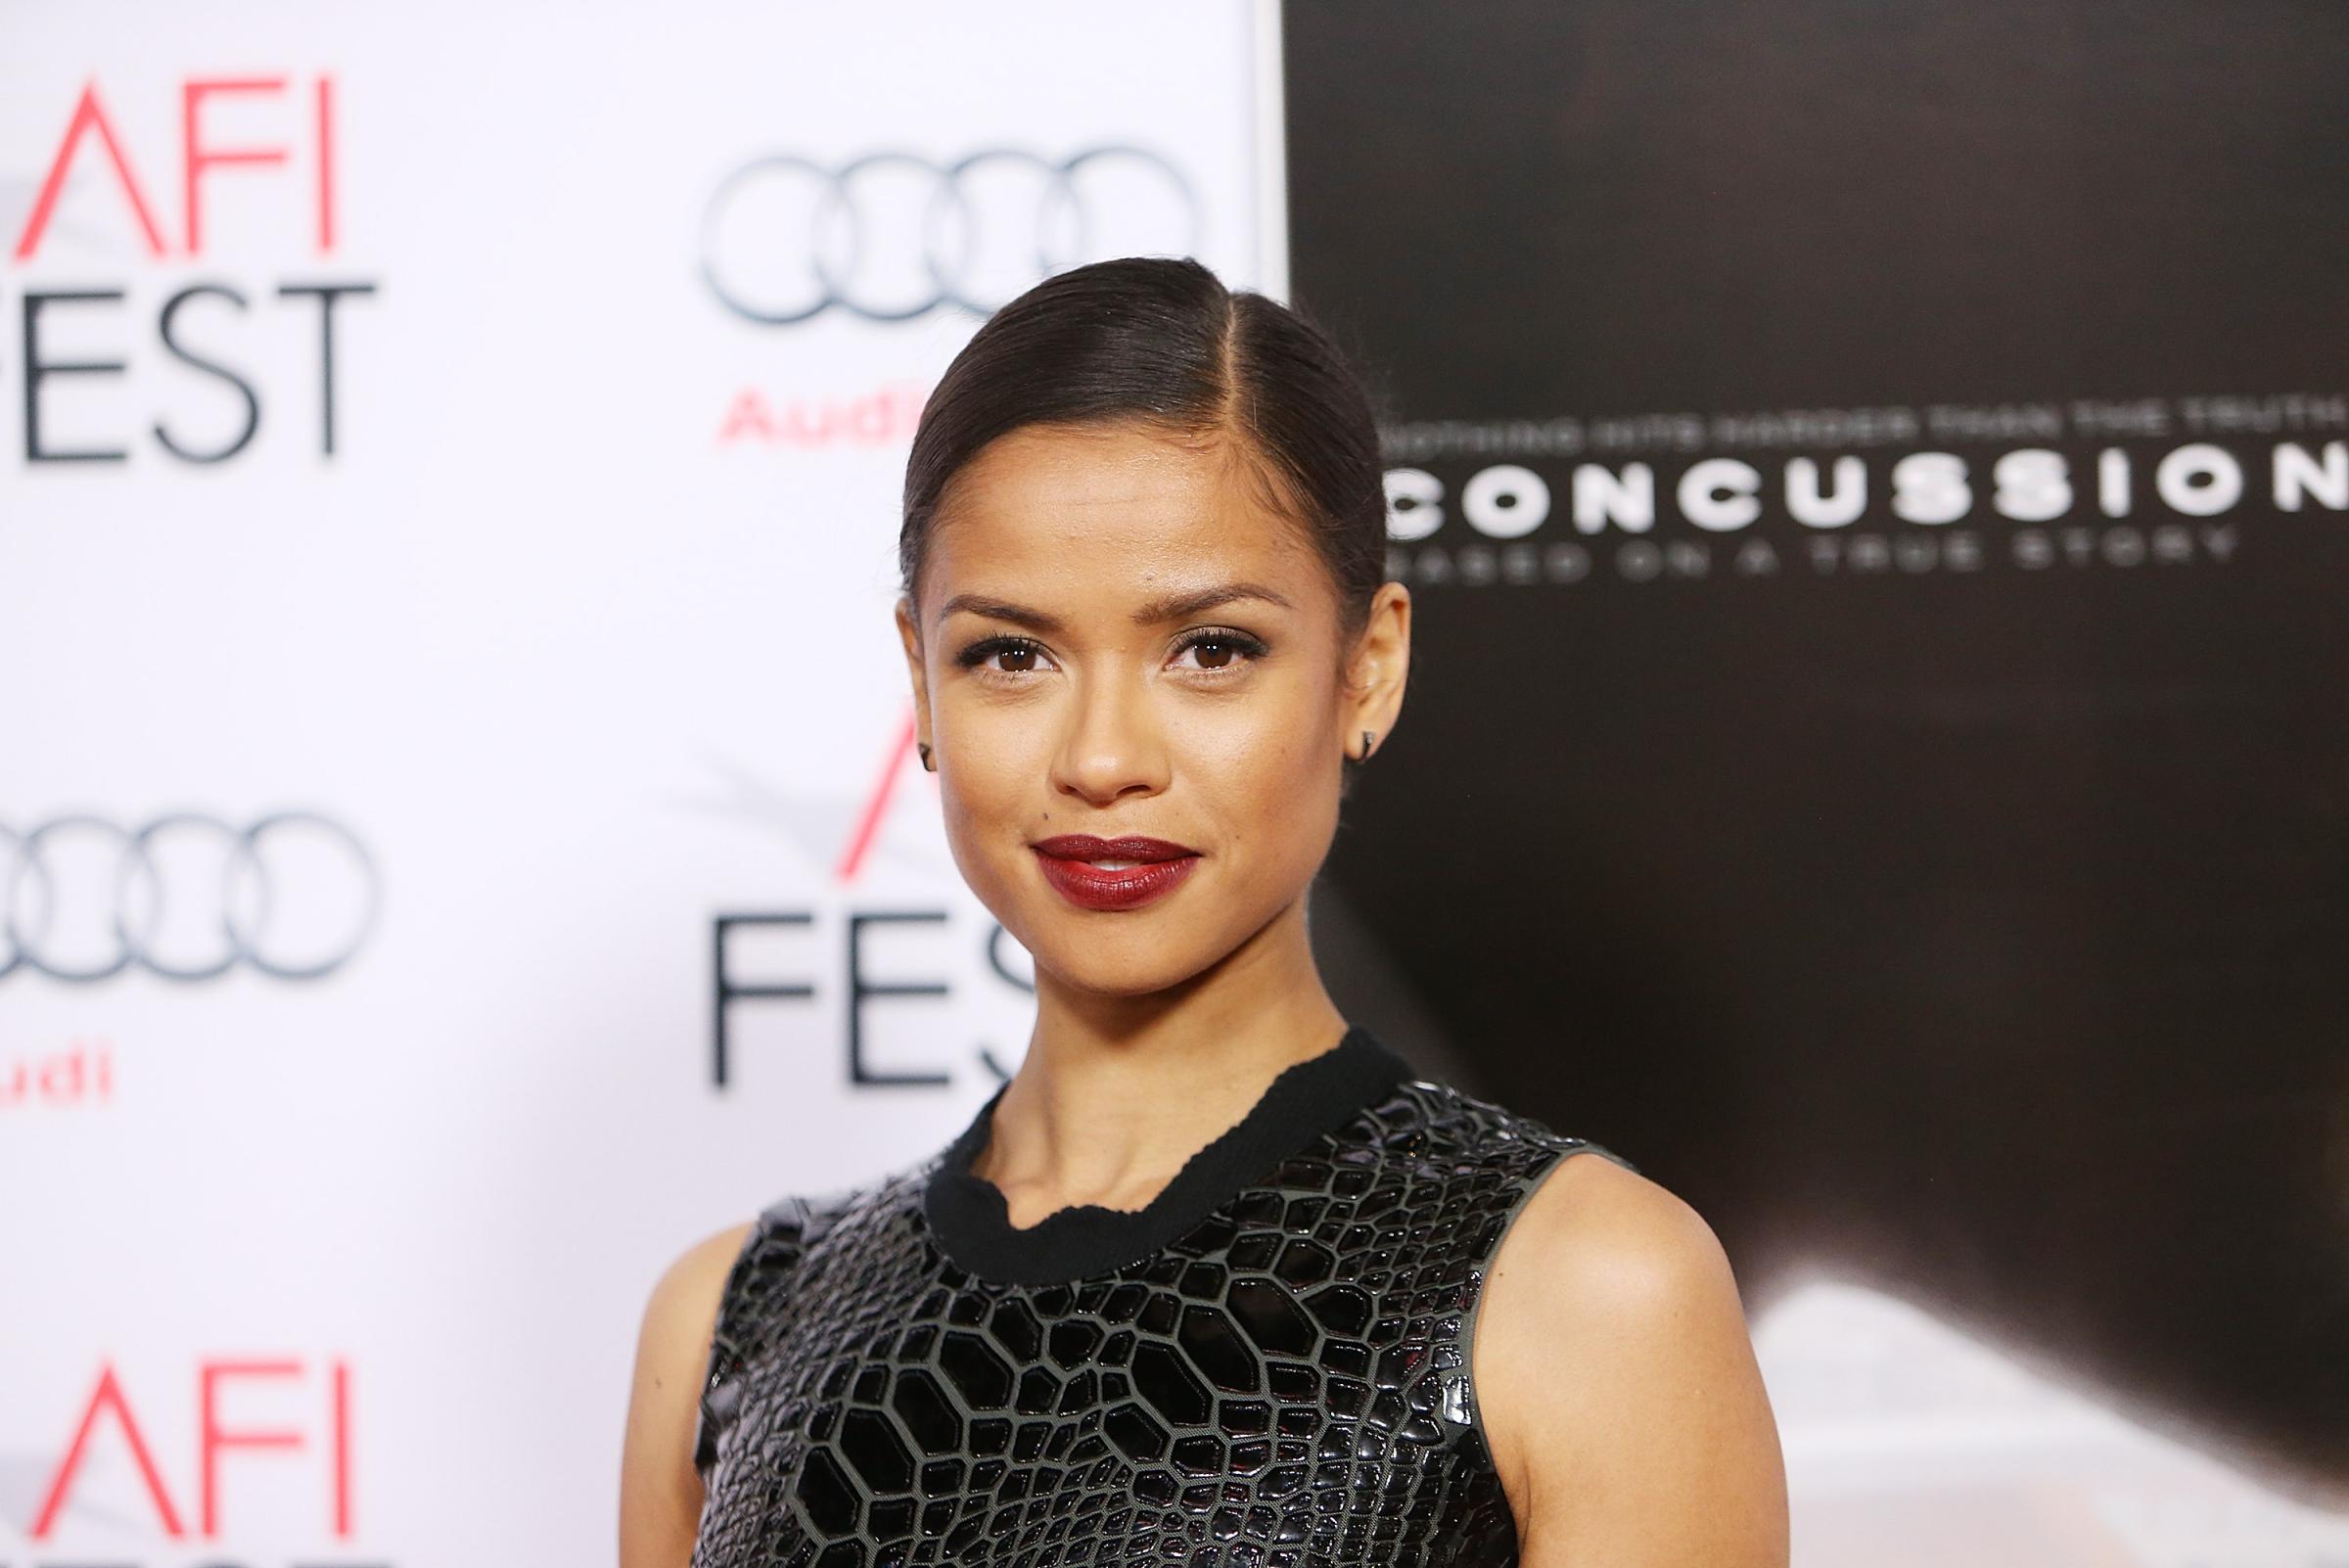 AFI FEST 2015 Presented By Audi Centerpiece Gala Premiere Of Columbia Pictures' "Concussion" - Arrivals